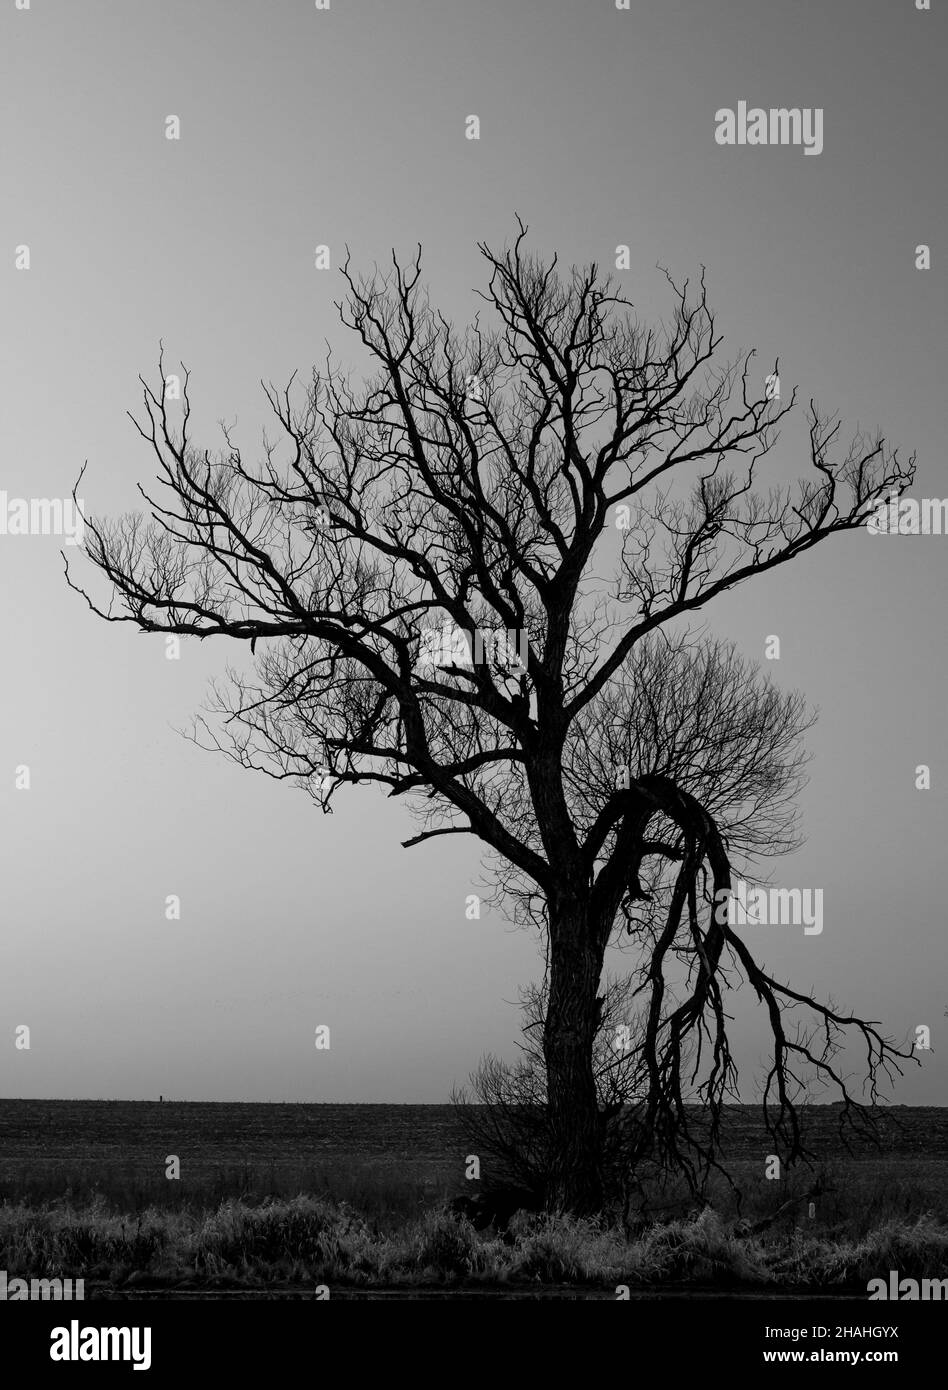 Grayscale shot of a leafless tree in the field at dusk Stock Photo